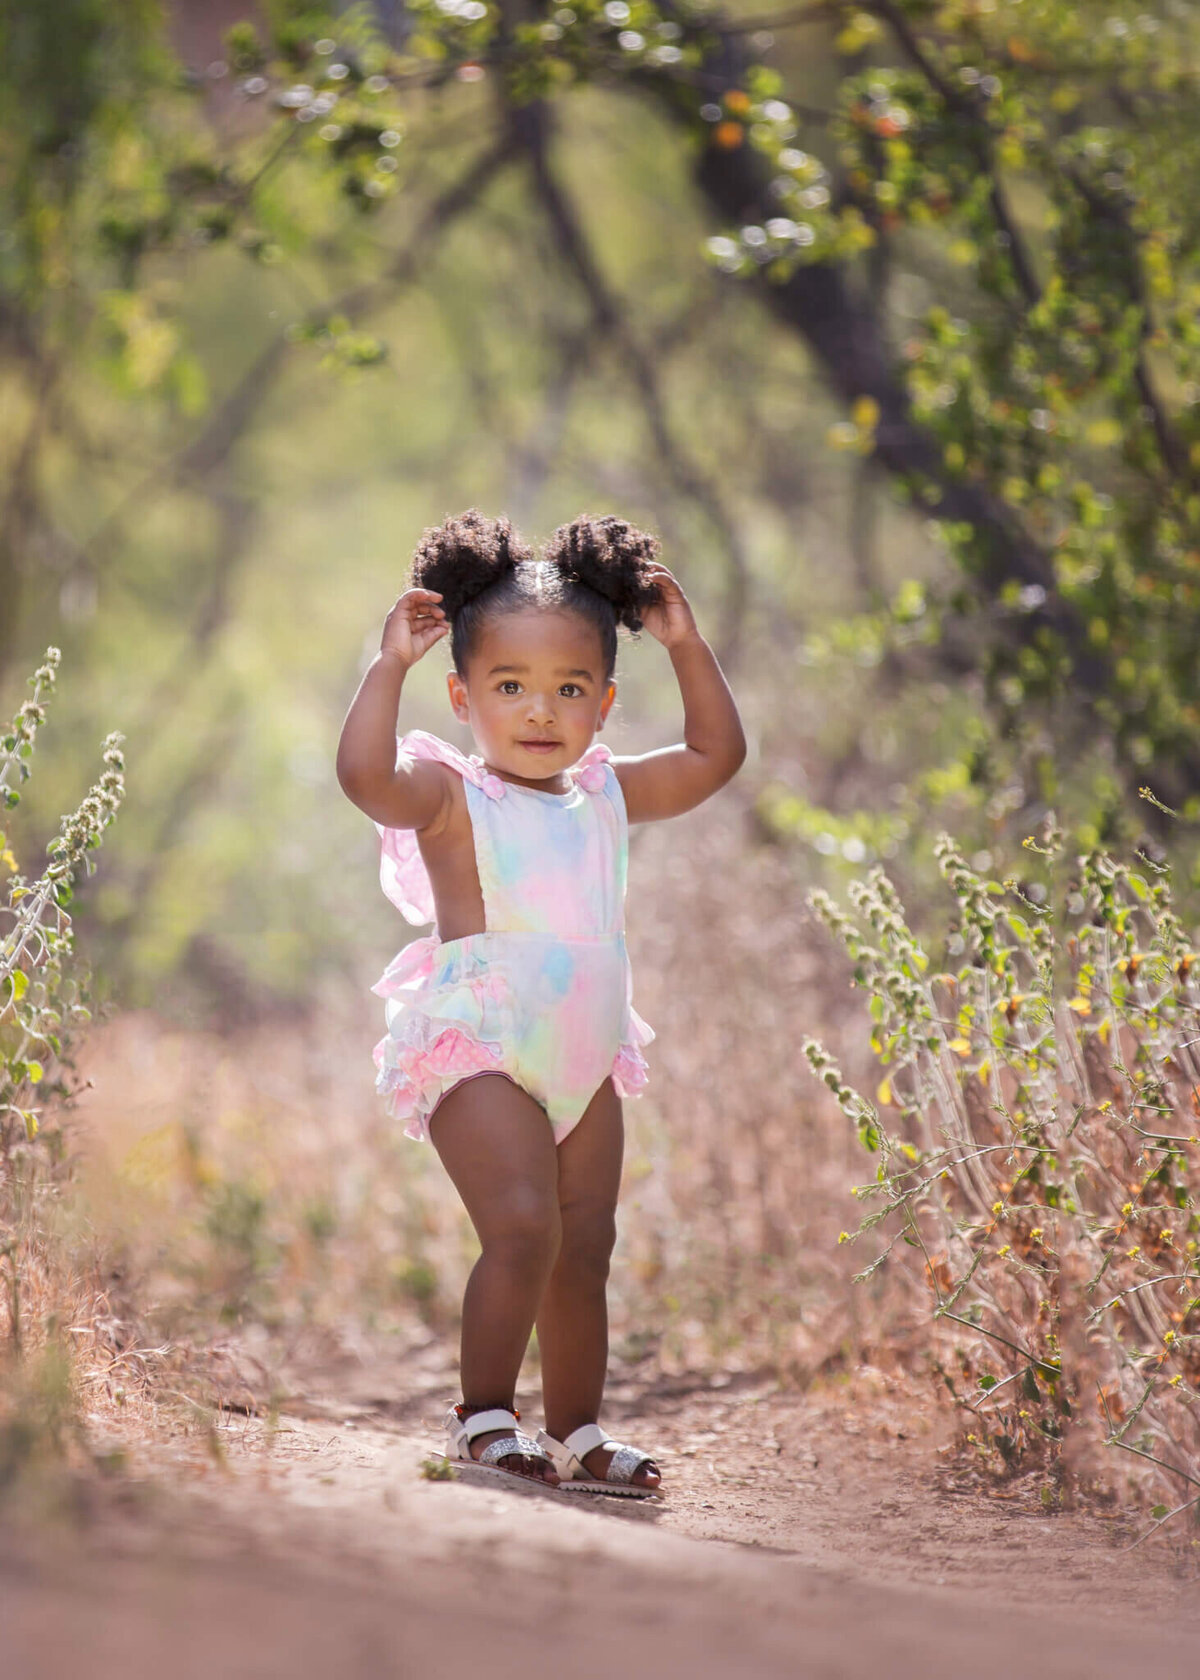 Toddler holding her pigtails in Woodland Hills park - Los Angeles Children’s Photographer